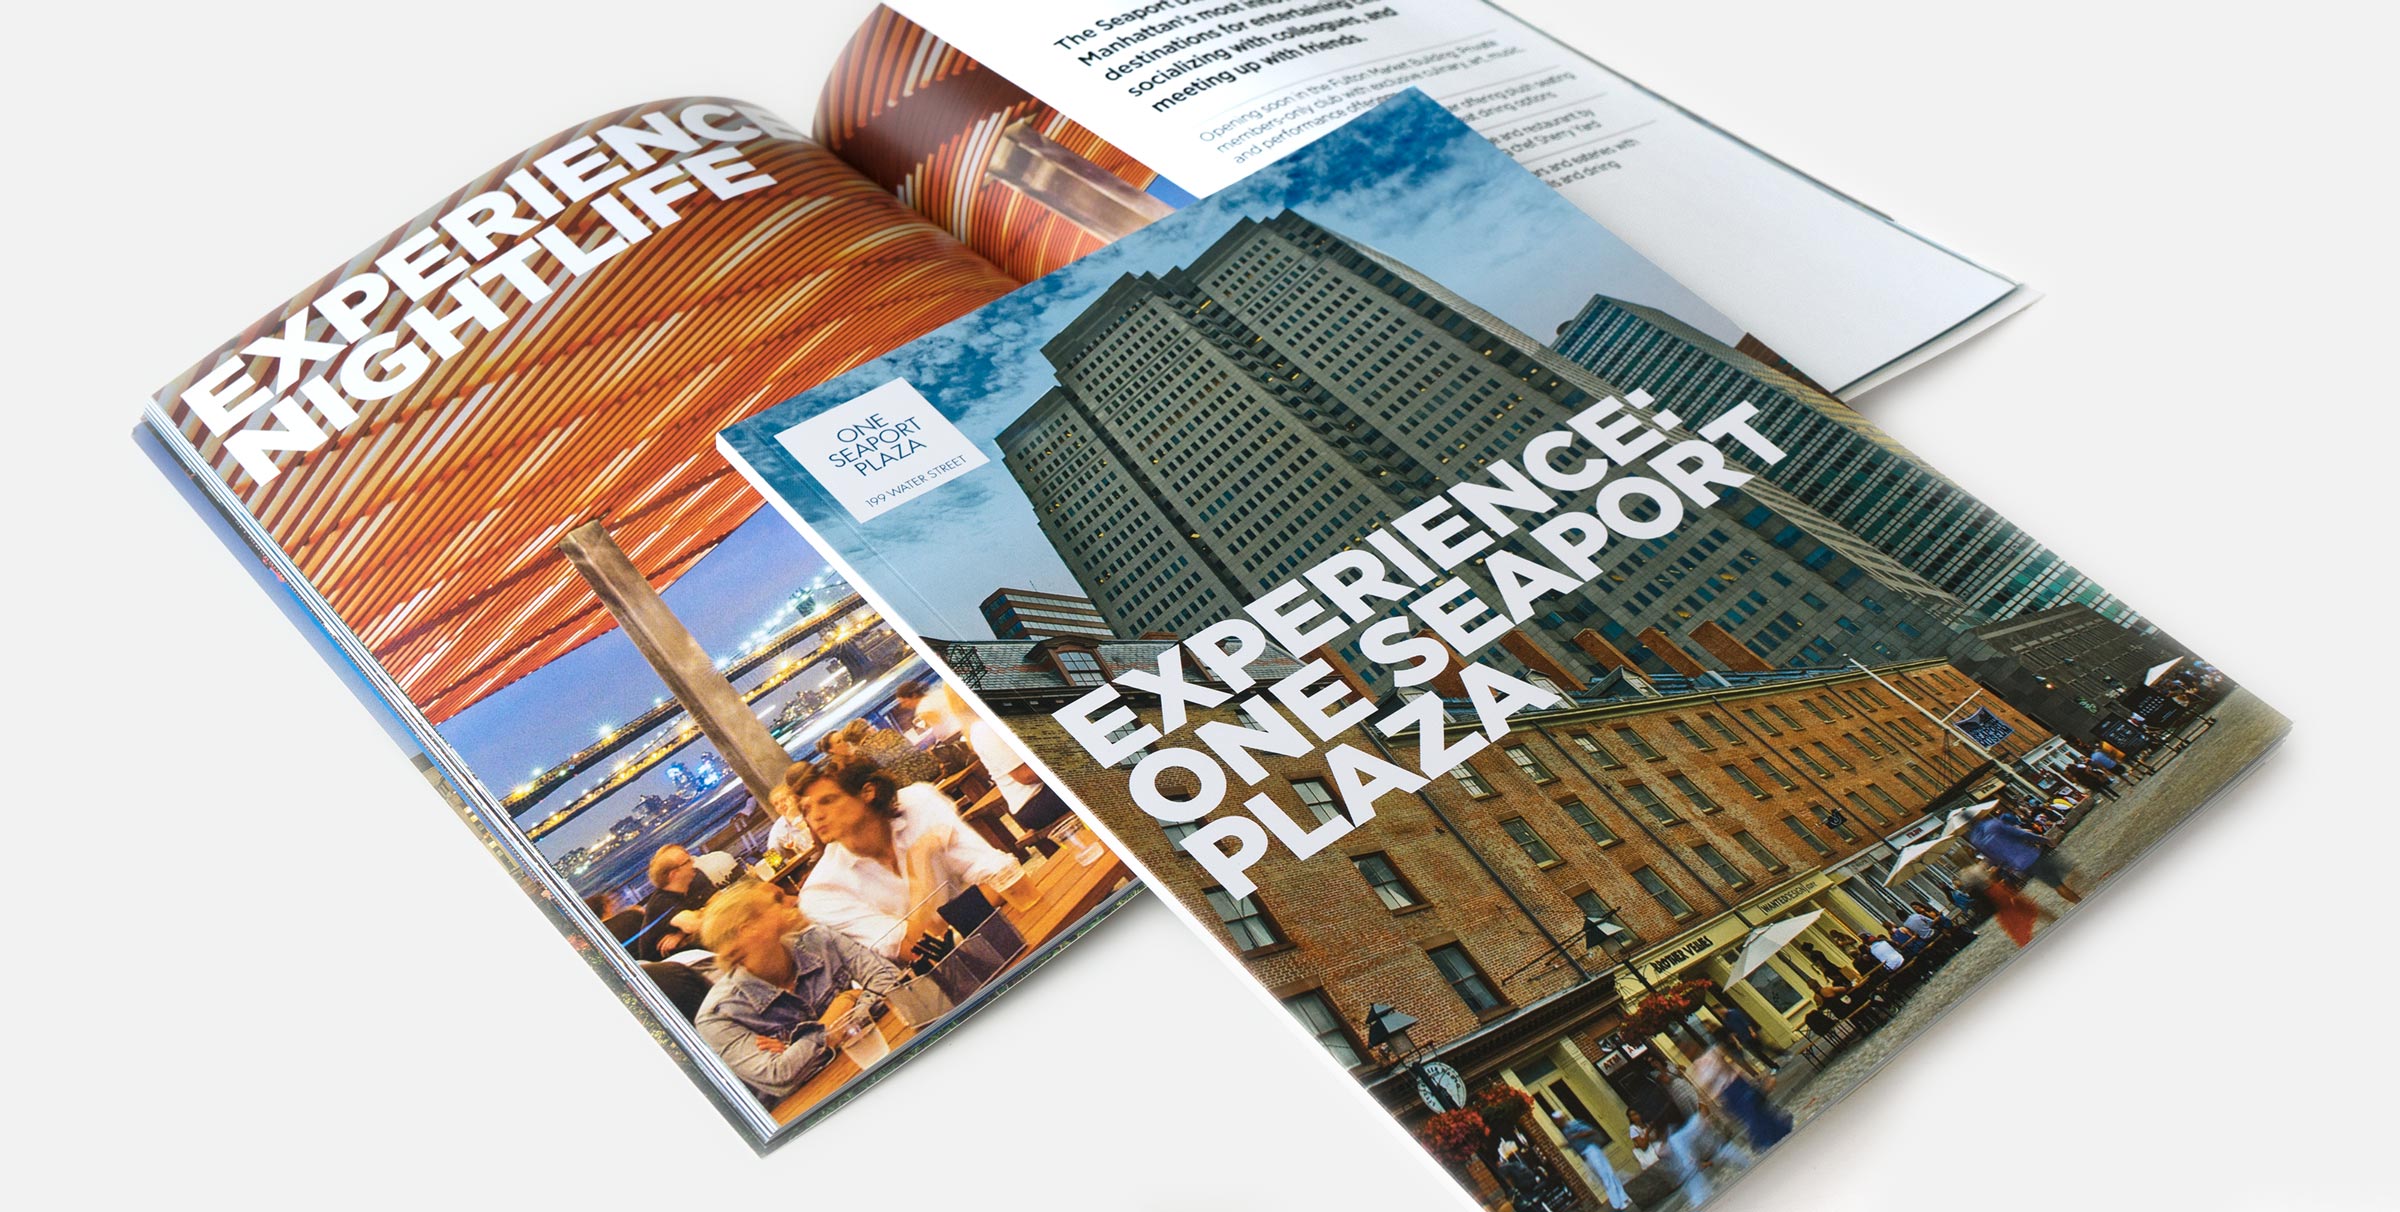 Print collateral for One Seaport Plaza